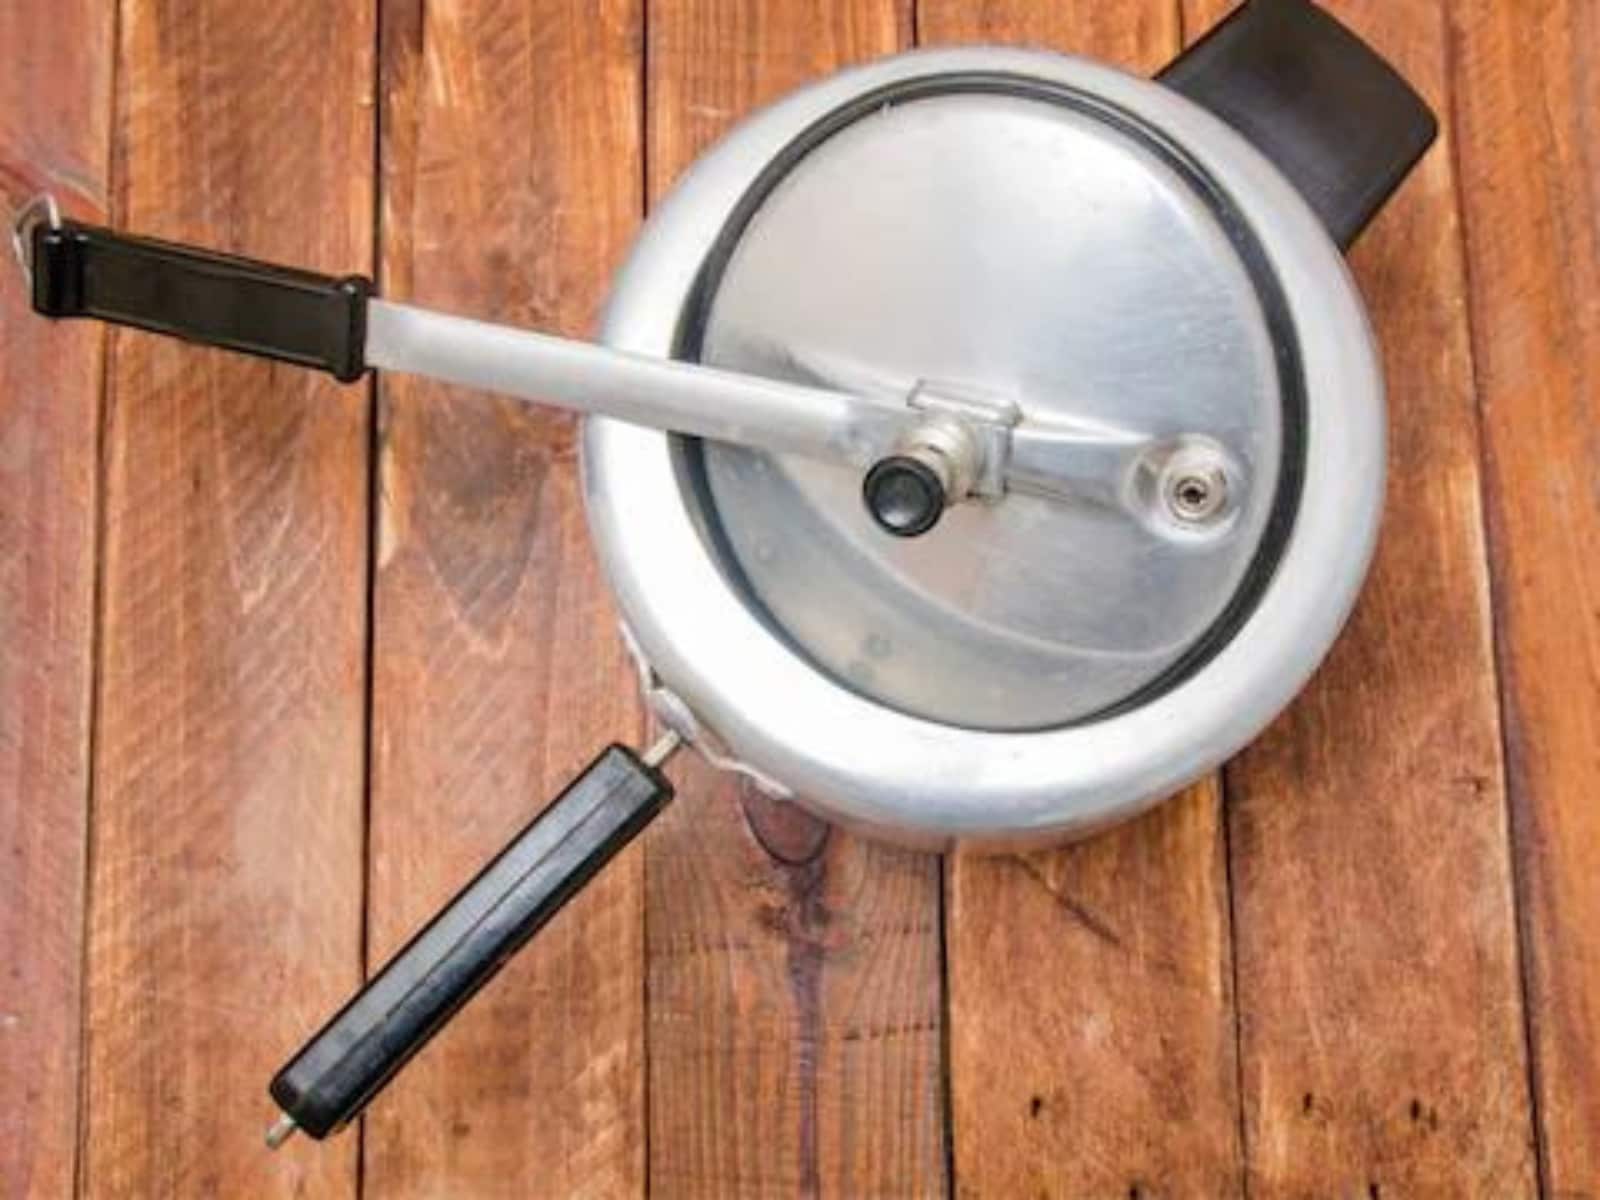 Tips And Tricks To Use Loose Rubber Of Pressure Cooker - News18